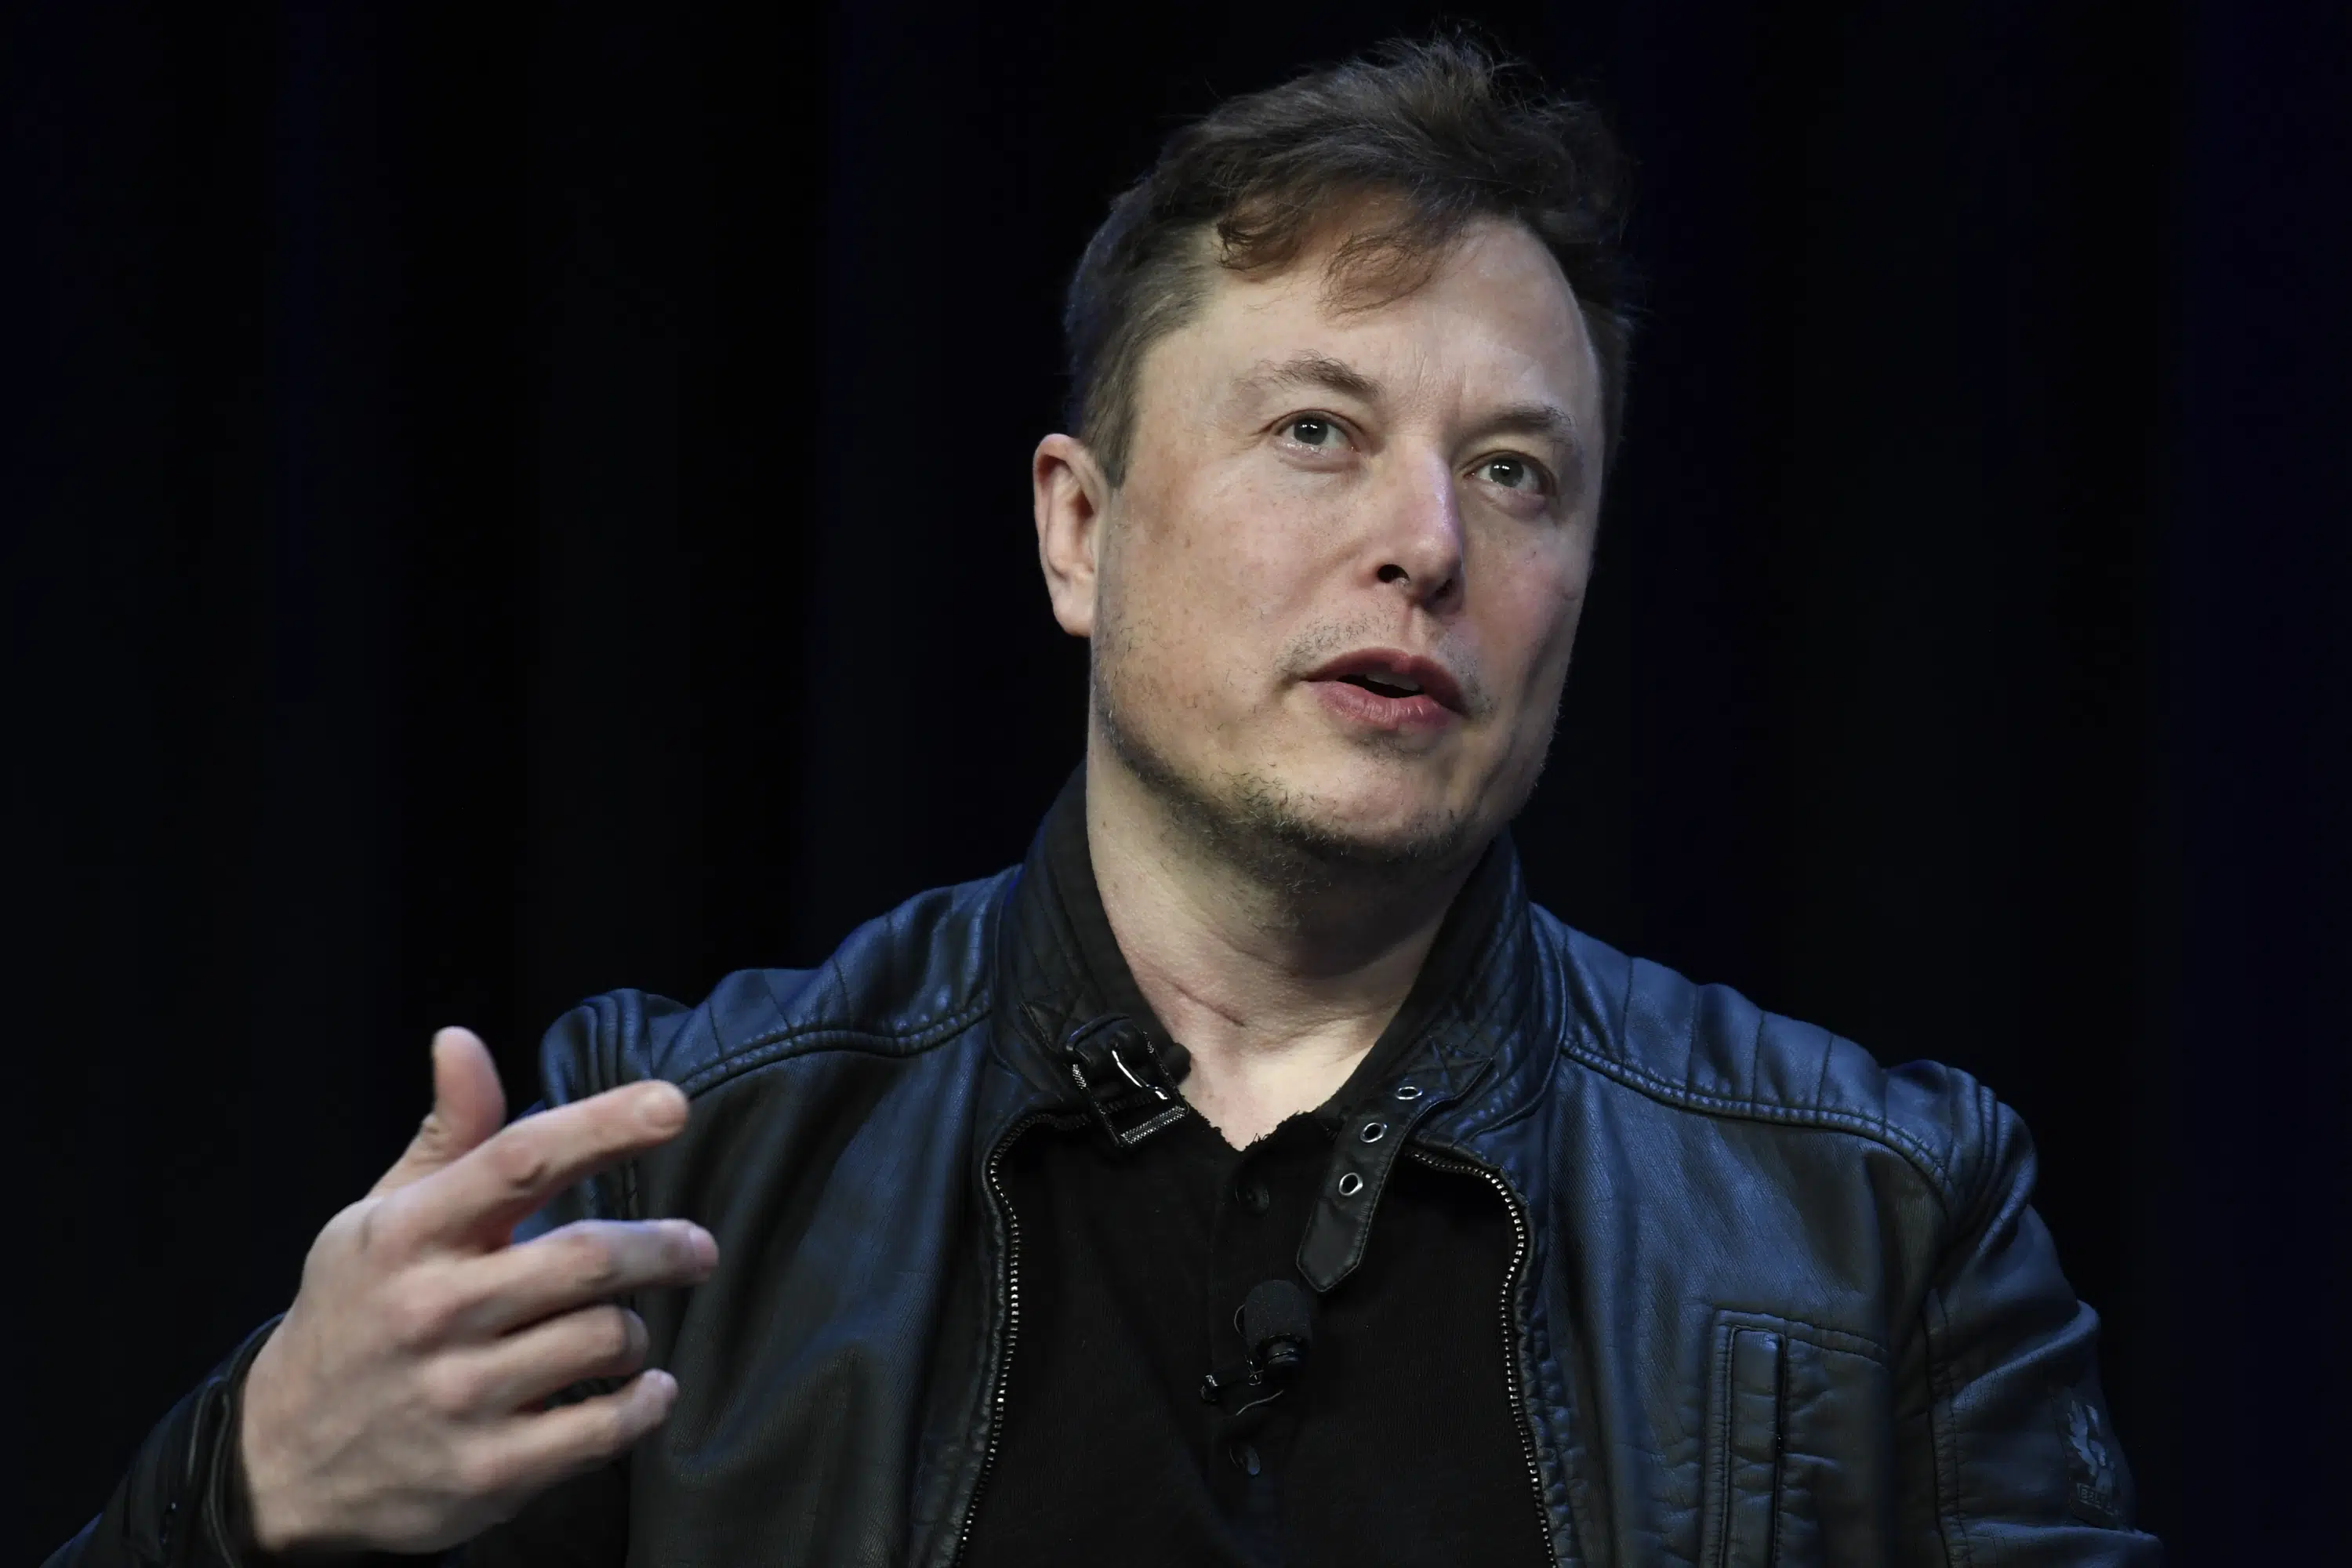 Elon Musk apologizes after mocking laid-off Twitter employee Haraldur Thorleifsson, who joined..